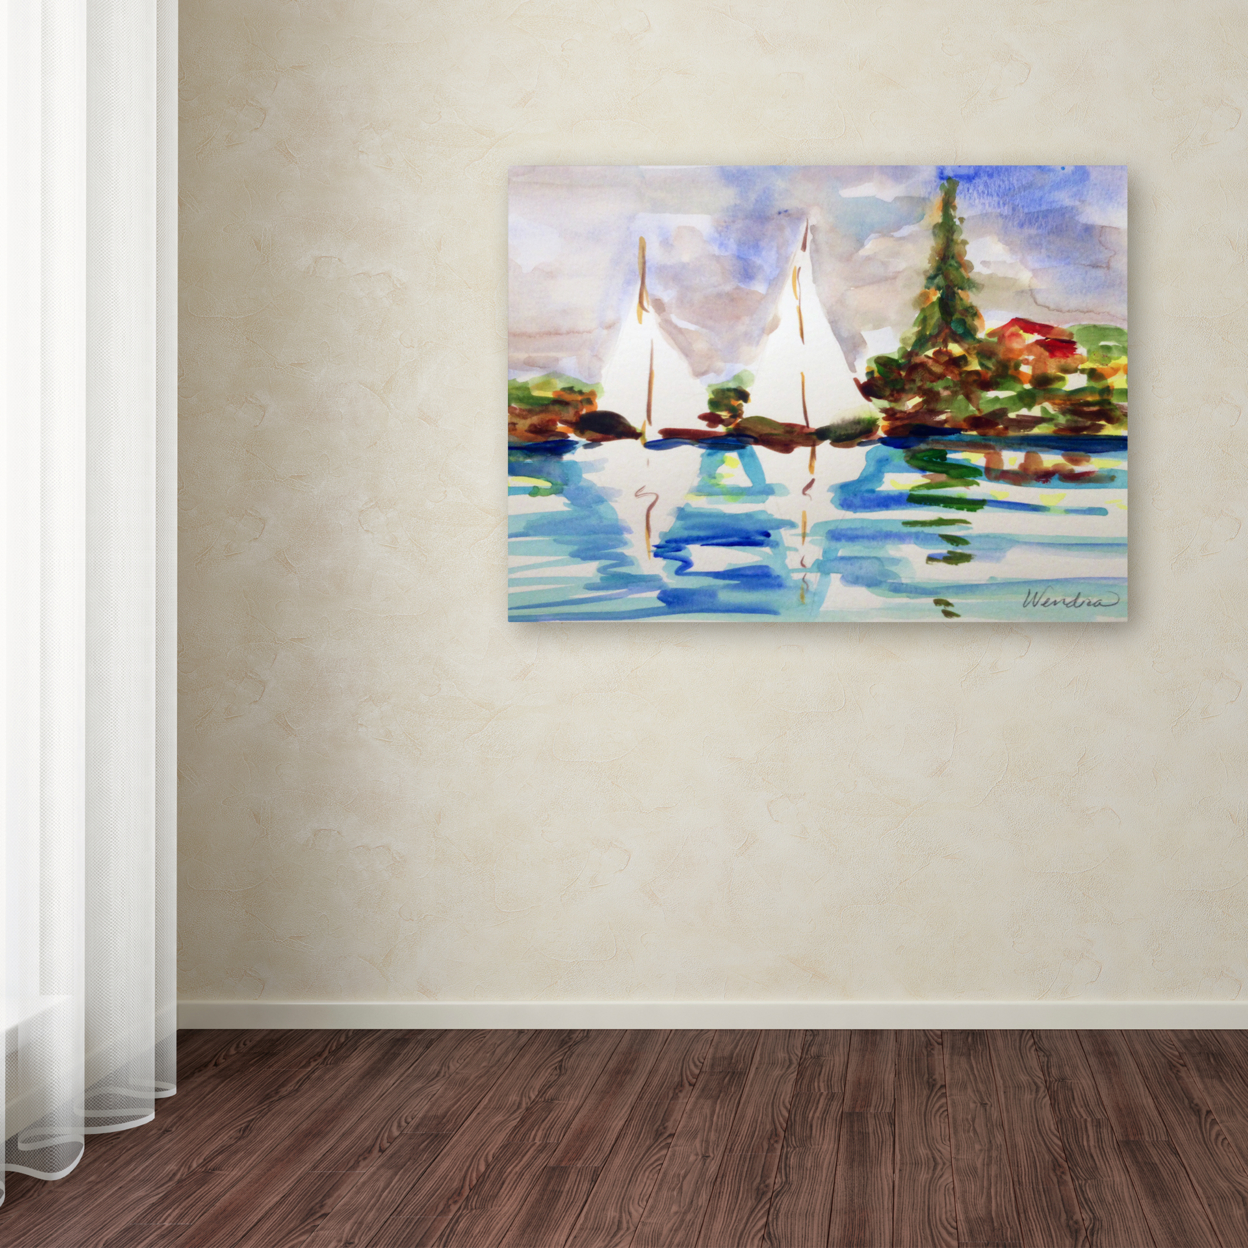 Wendra 'A Lovely Day' Canvas Wall Art 35 X 47 Inches